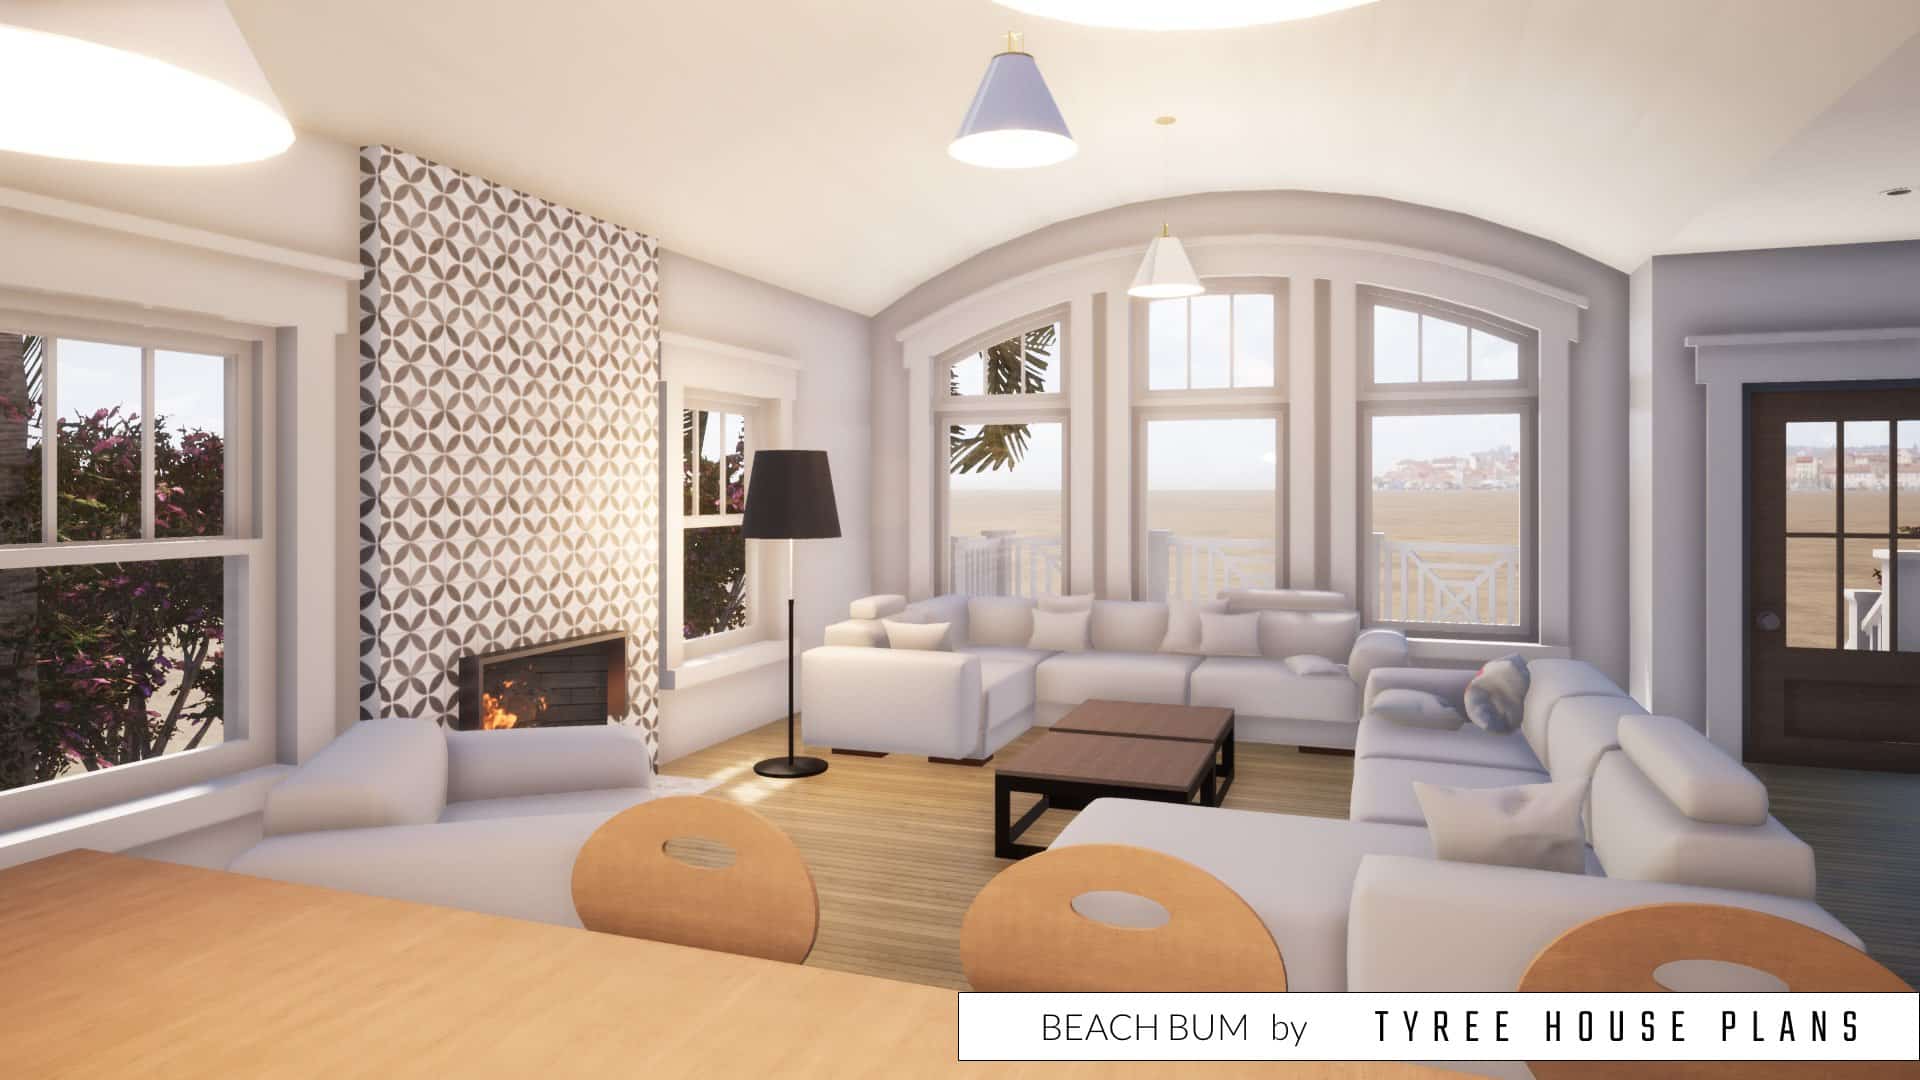 Living space. Beach Bum by Tyree House Plans.